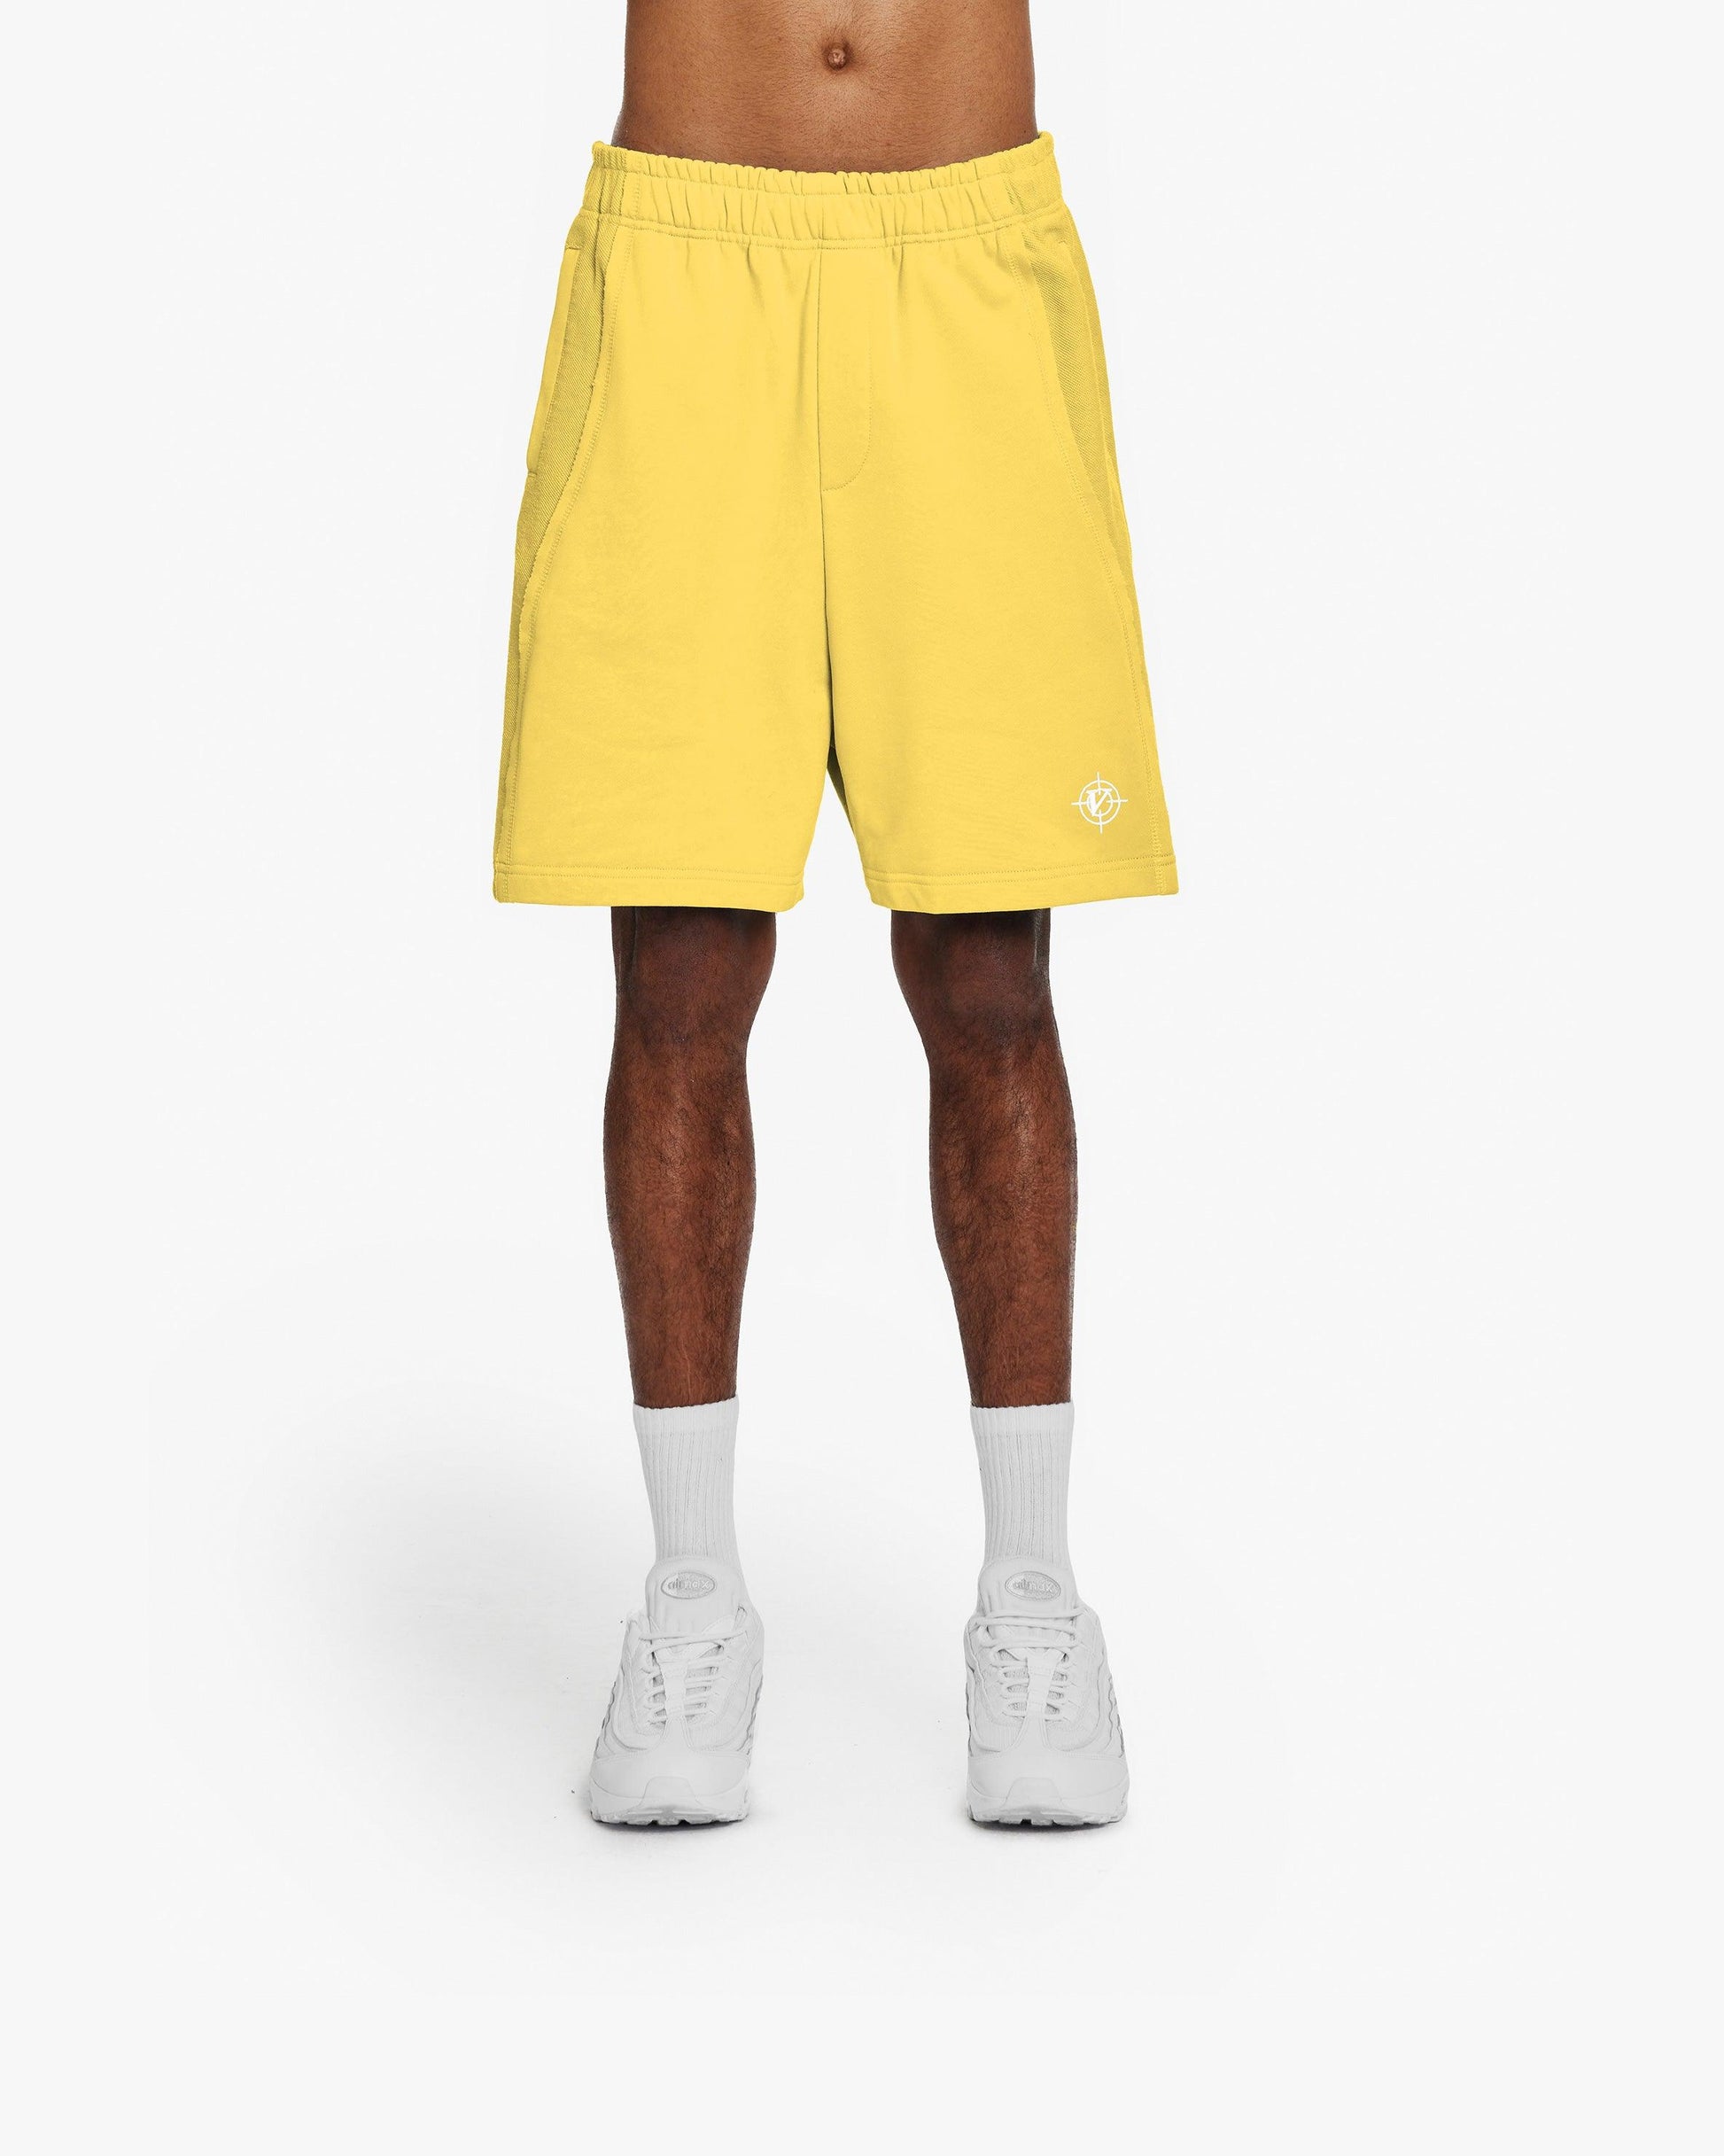 INSIDE OUT SHORTS SUNFLOWER - VICINITY